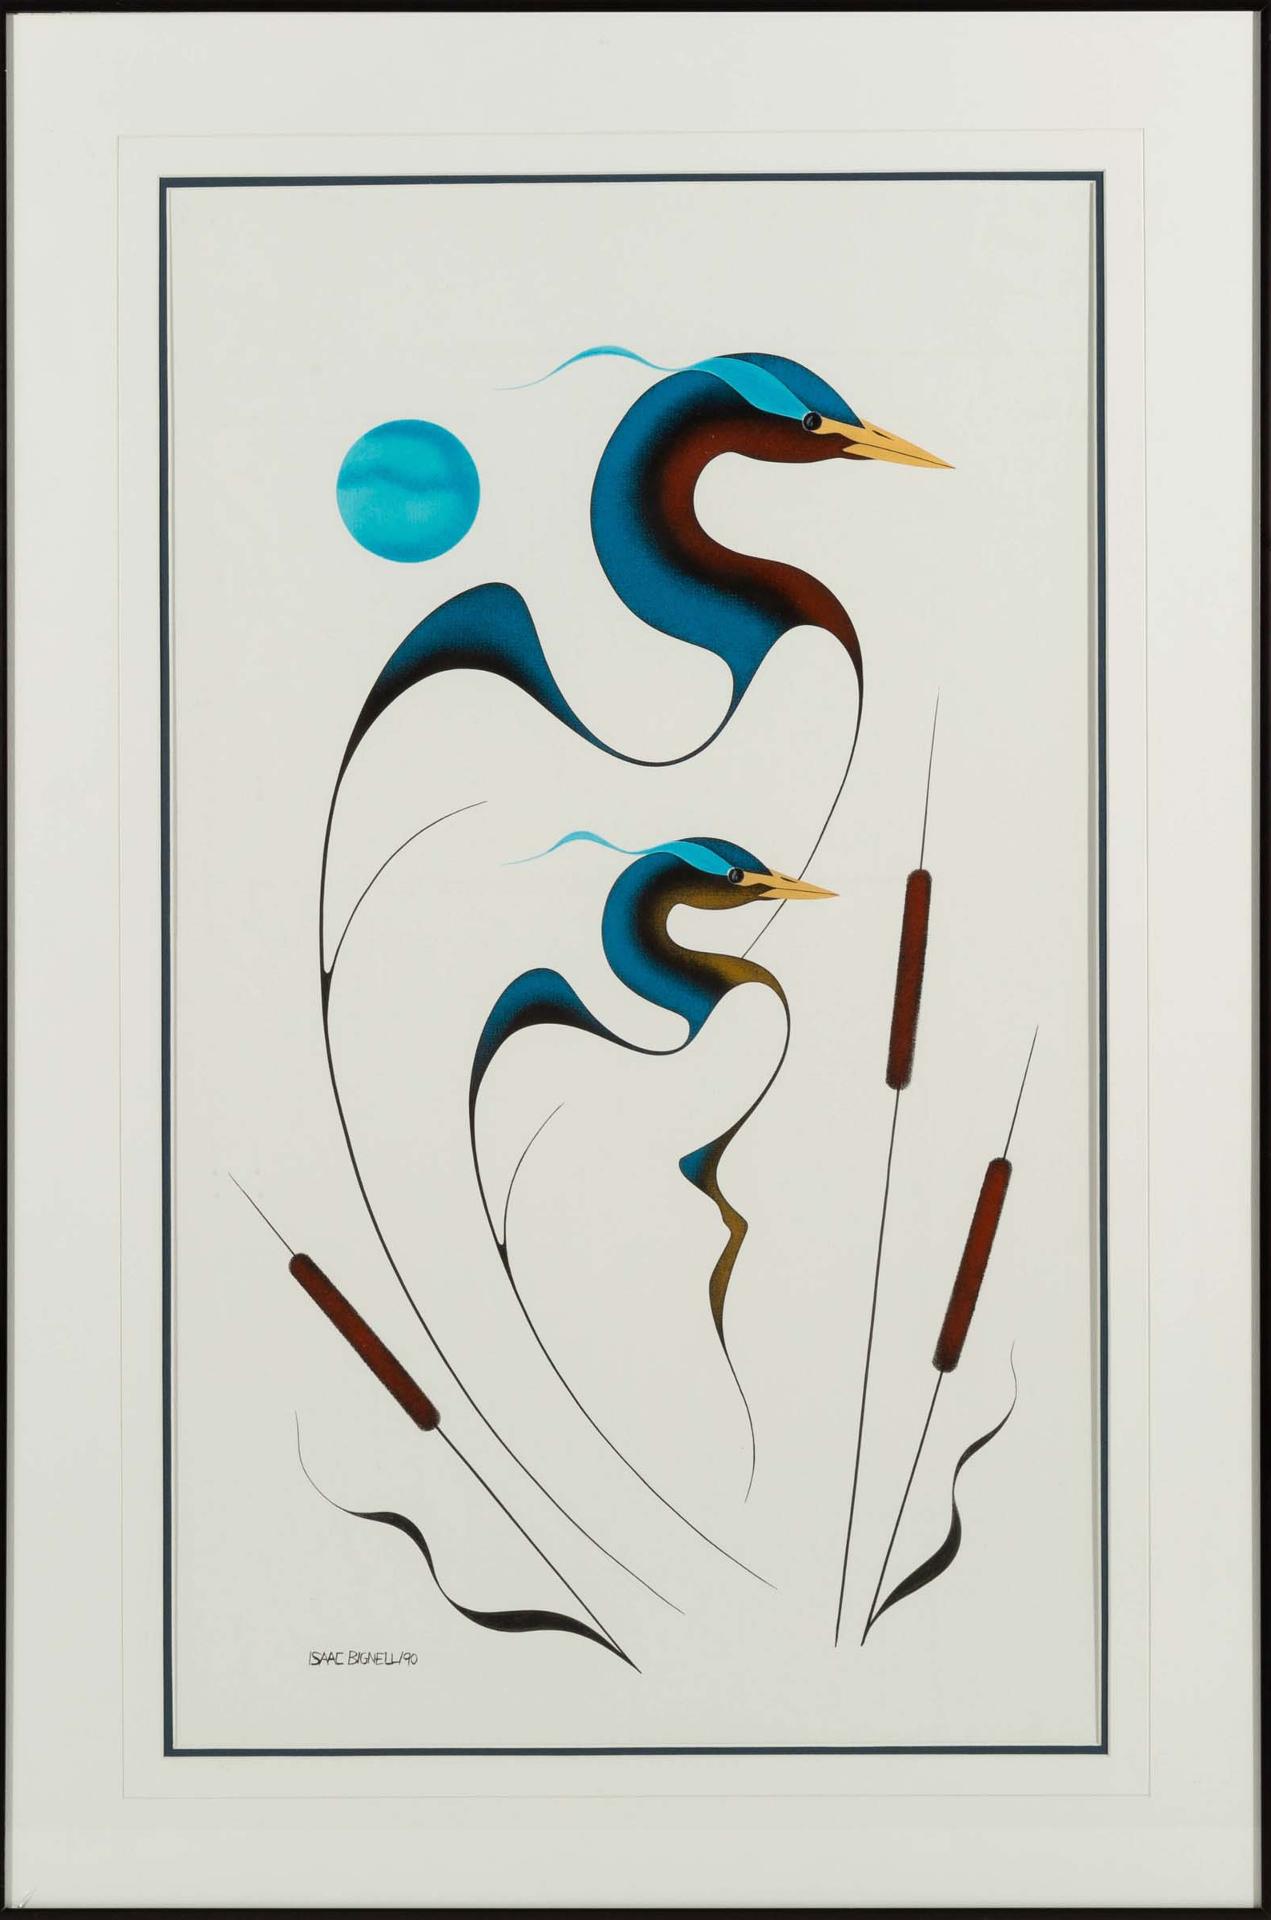 Isaac Bignell (1960-1995) - Untitled (Herons And Bullrushes)